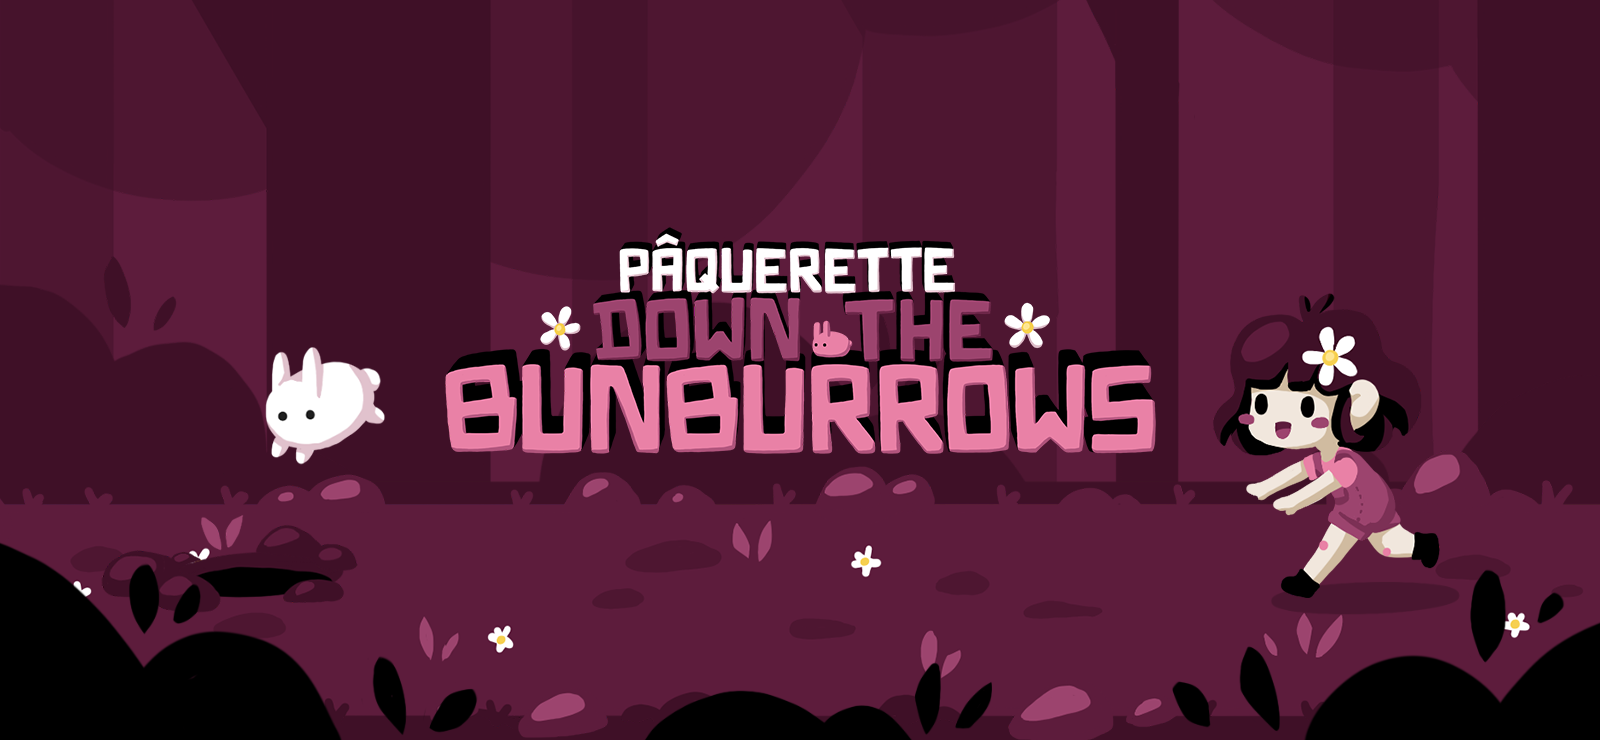 Paquerette Down The Bunburrows - Supporter Pack